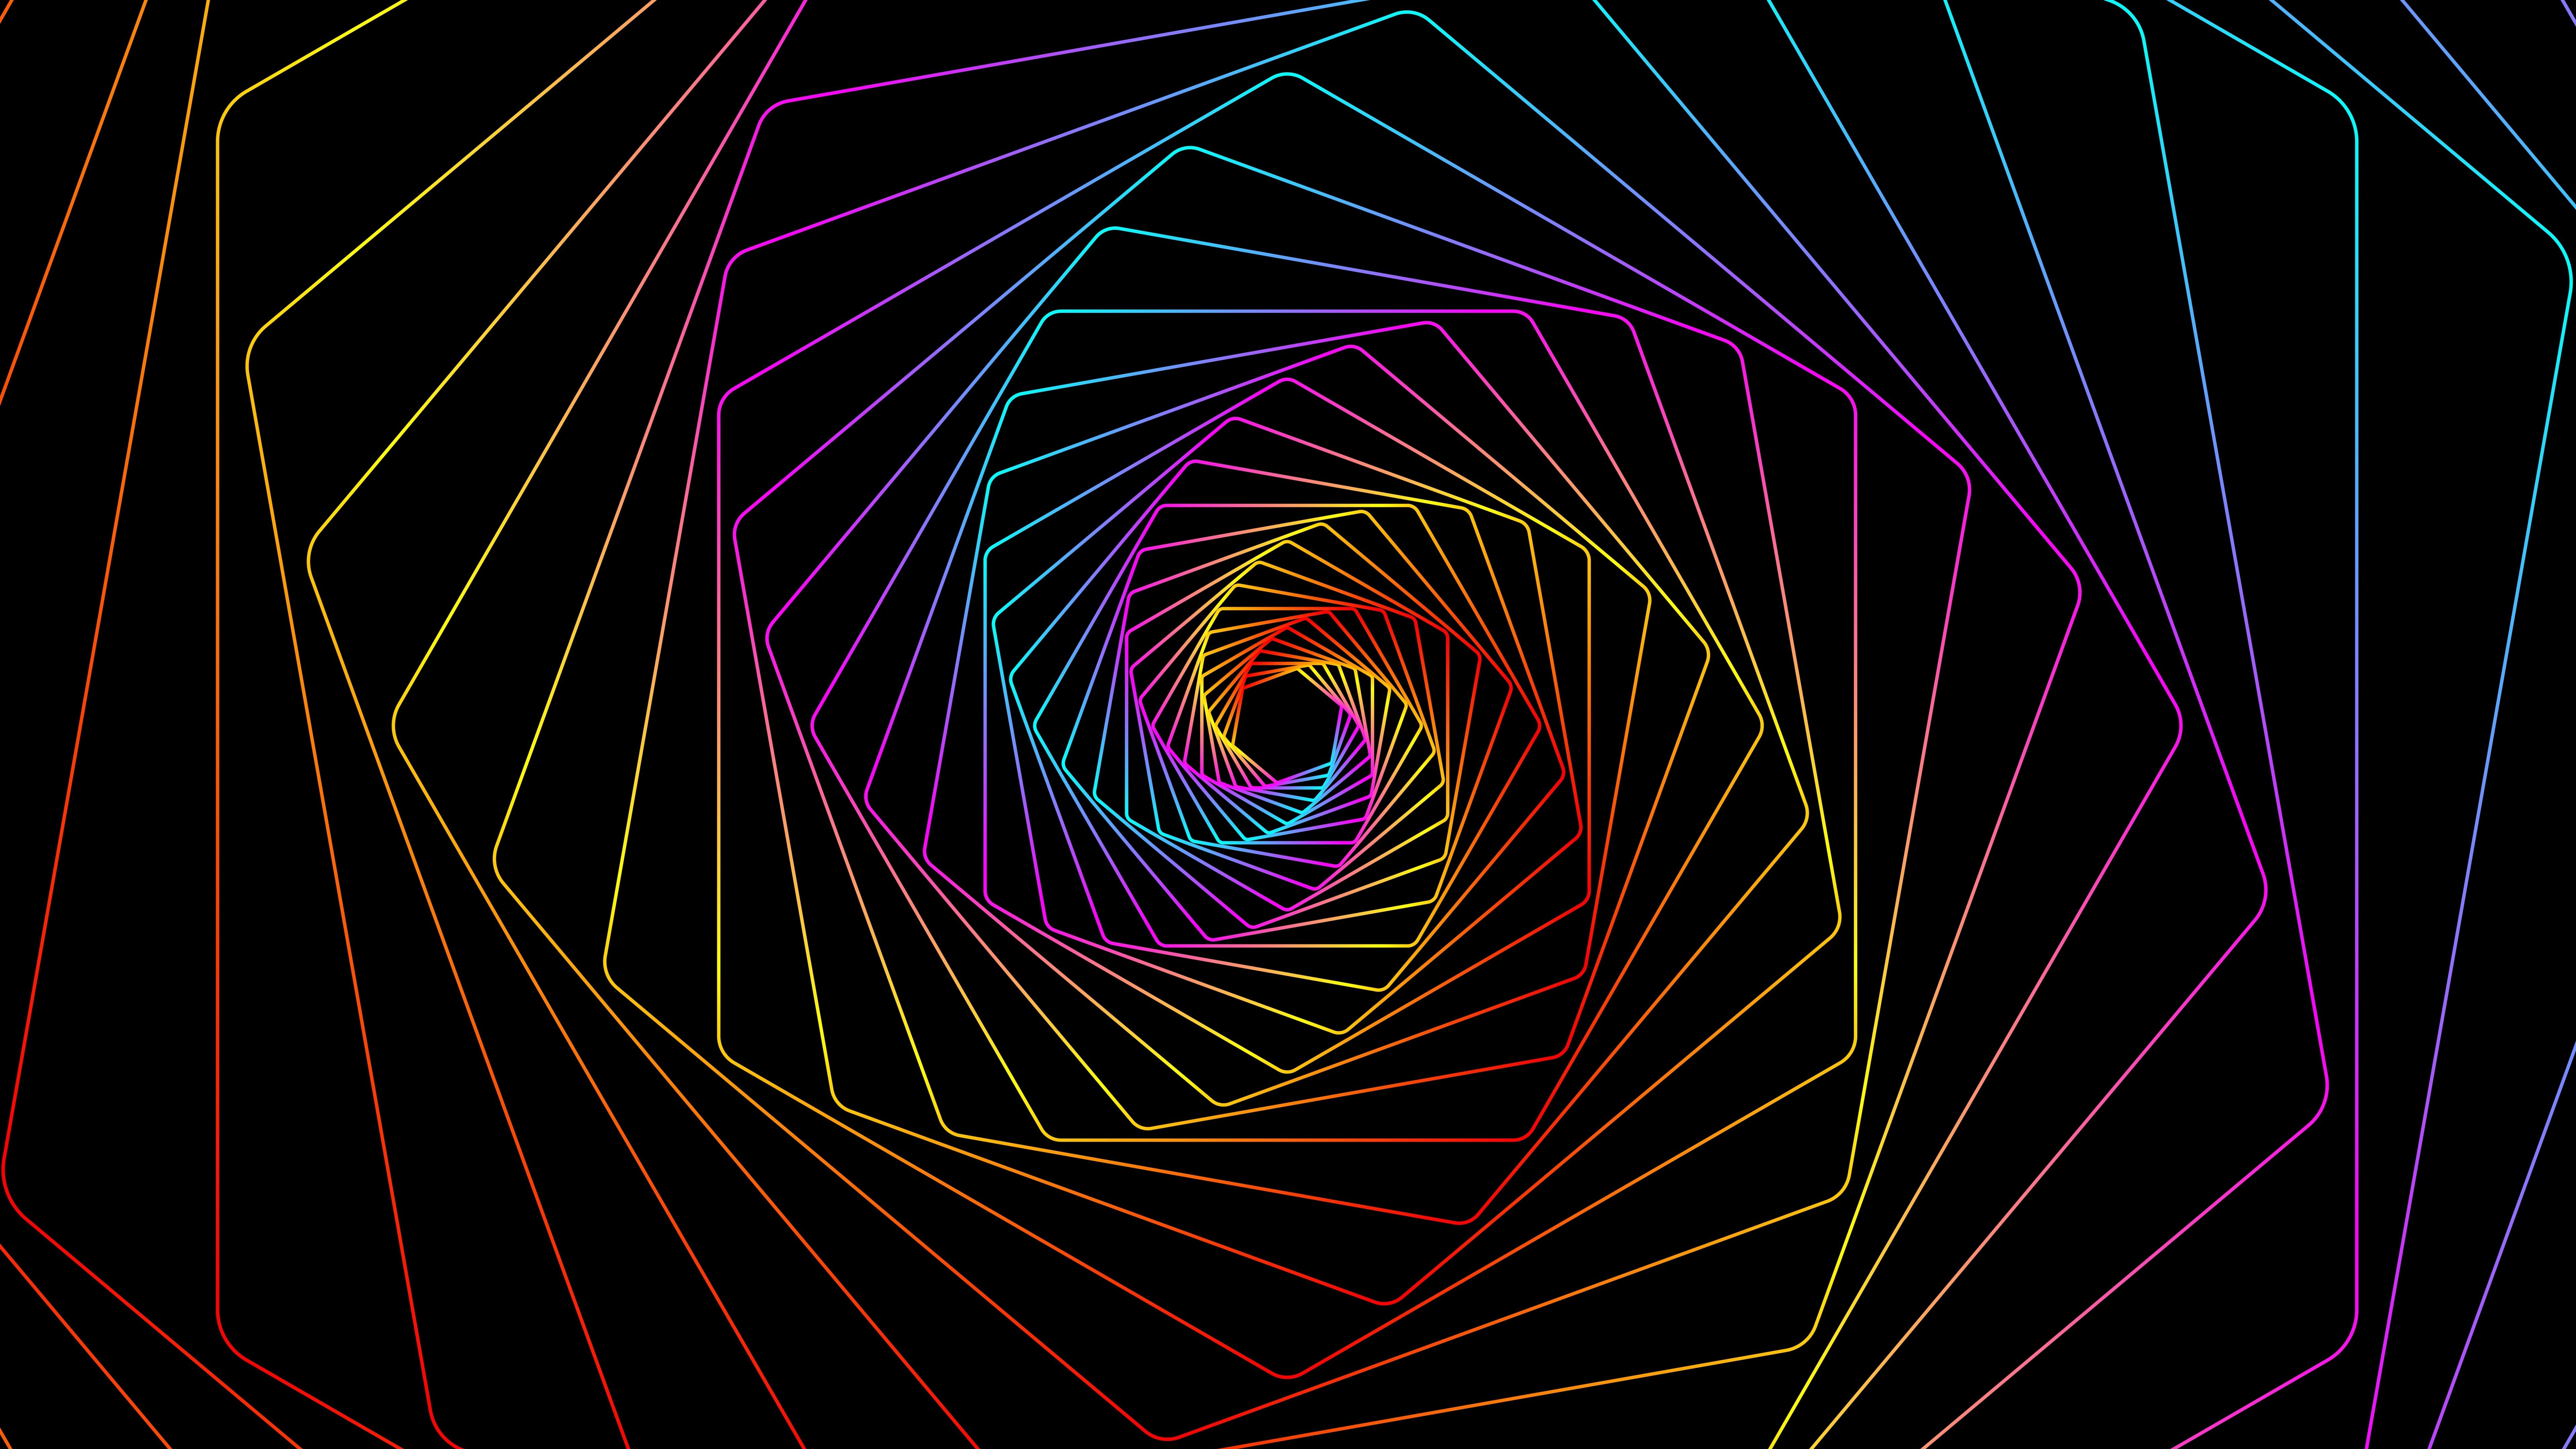 Wallpaper Spiral, rainbow lines, black background, abstract 7680x4320 UHD 8K Picture, Image